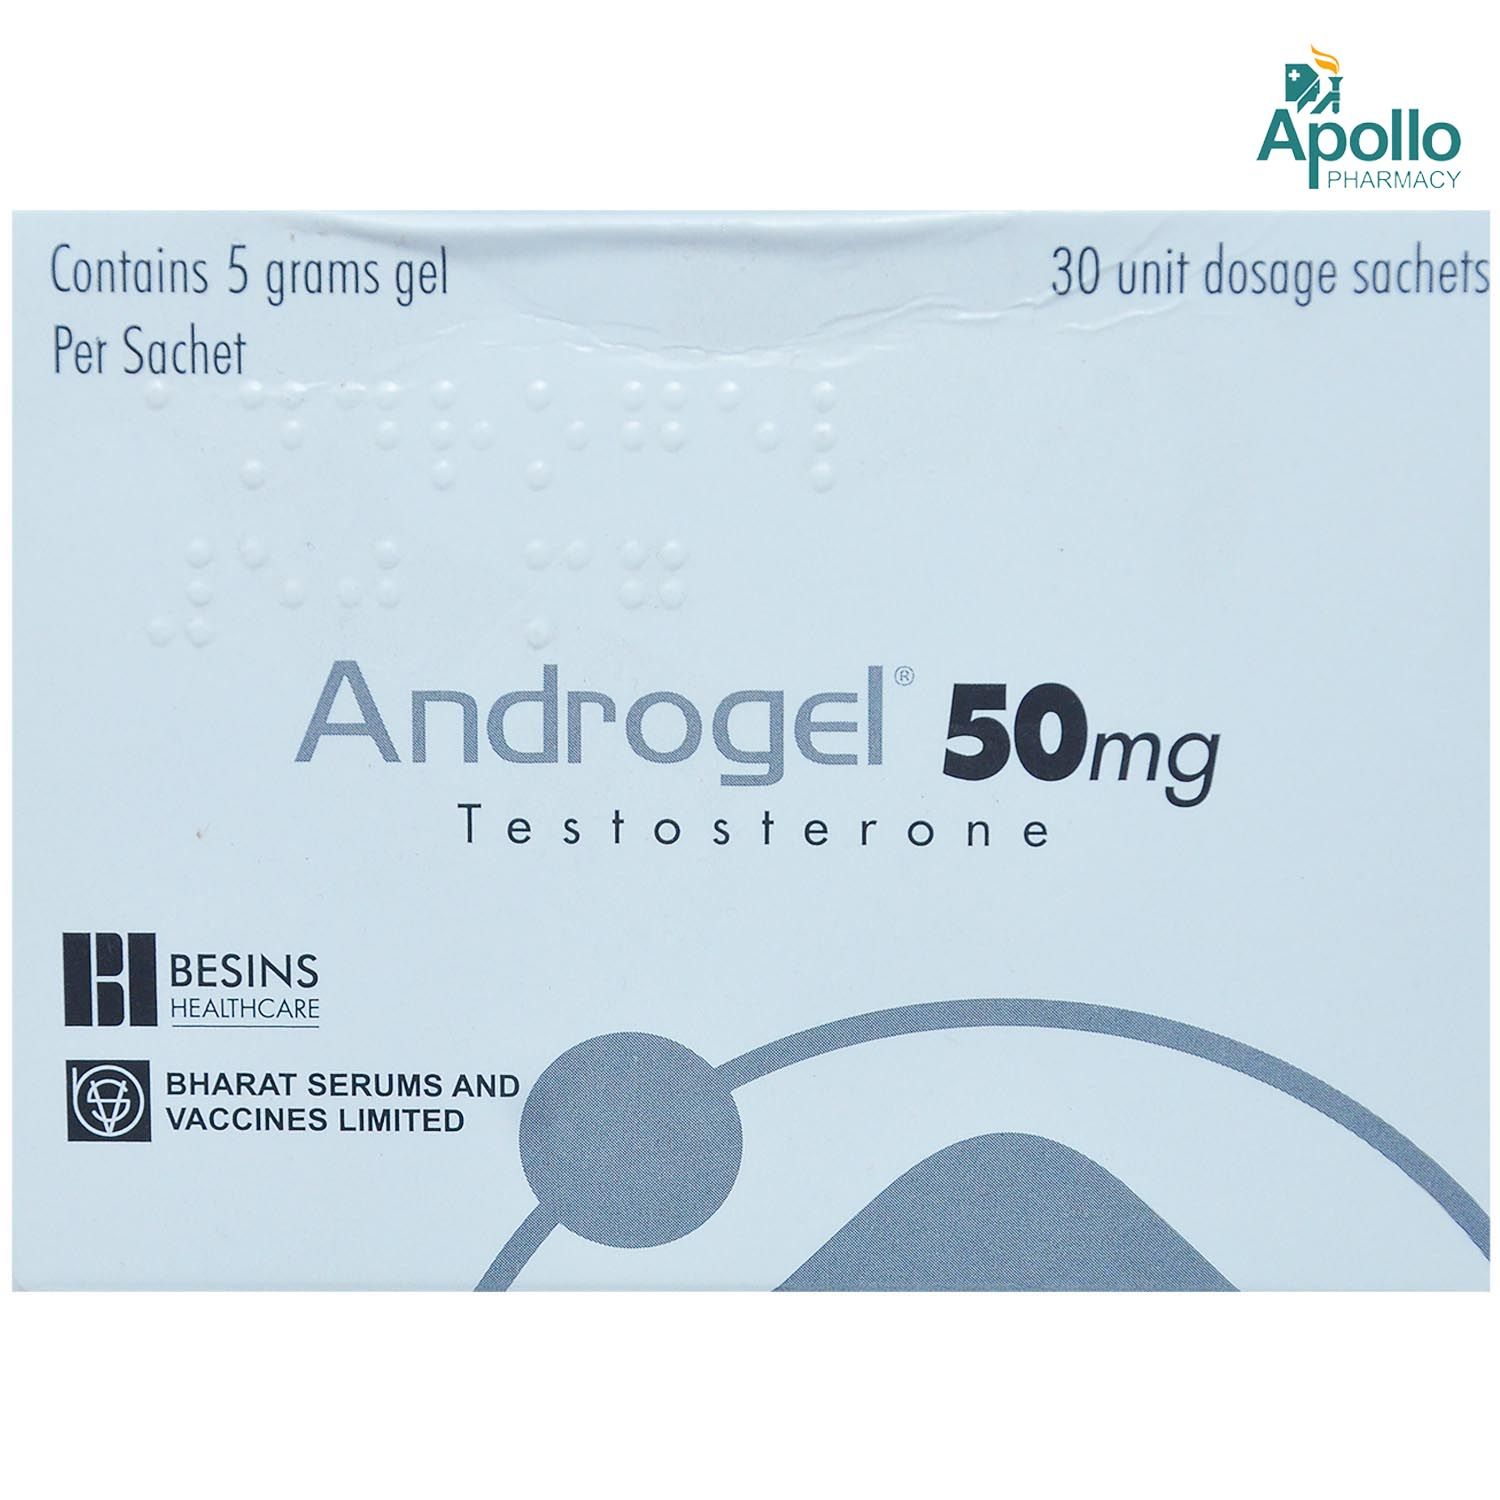 Androgel Testasterone 50 mg Sachet 5 gm Uses, Side Effects, Price